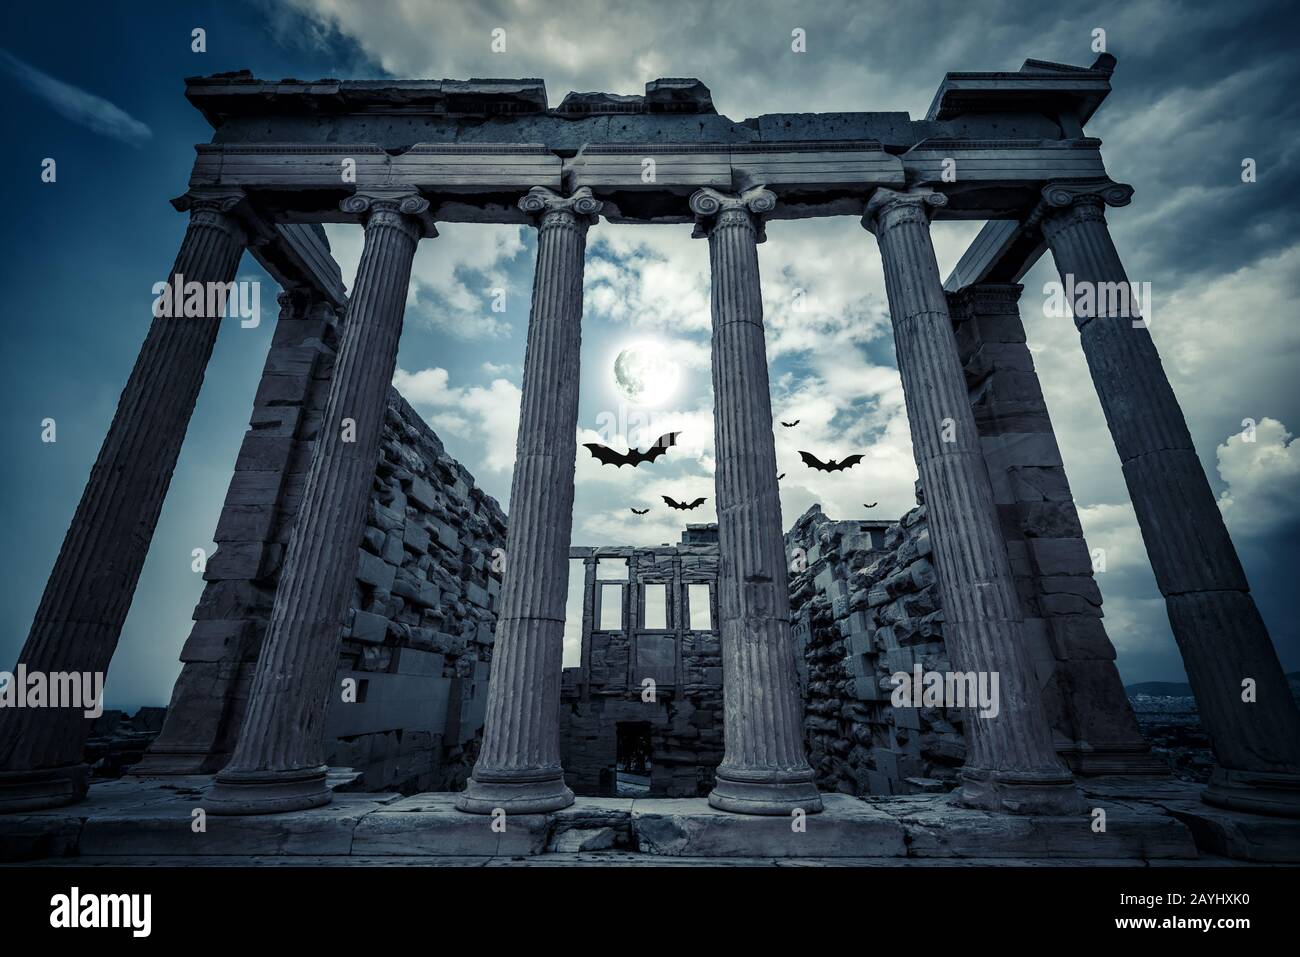 Erechtheion temple in full moon, Athens, Greece. Scary gloomy scene with bats for Halloween theme. Ancient Greek architecture of Athens at night. Old Stock Photo